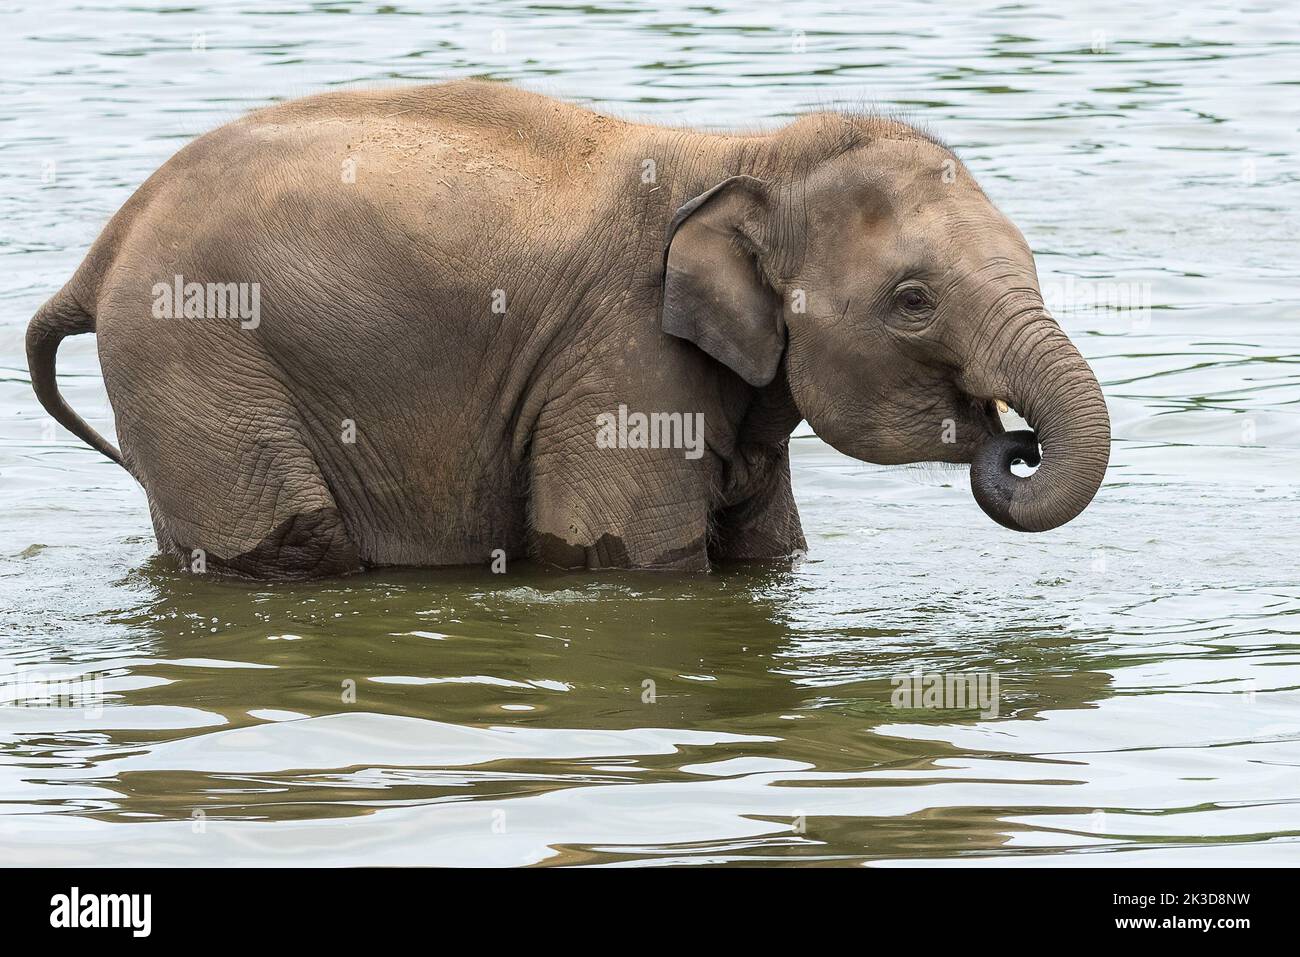 Elephant in water Stock Photo